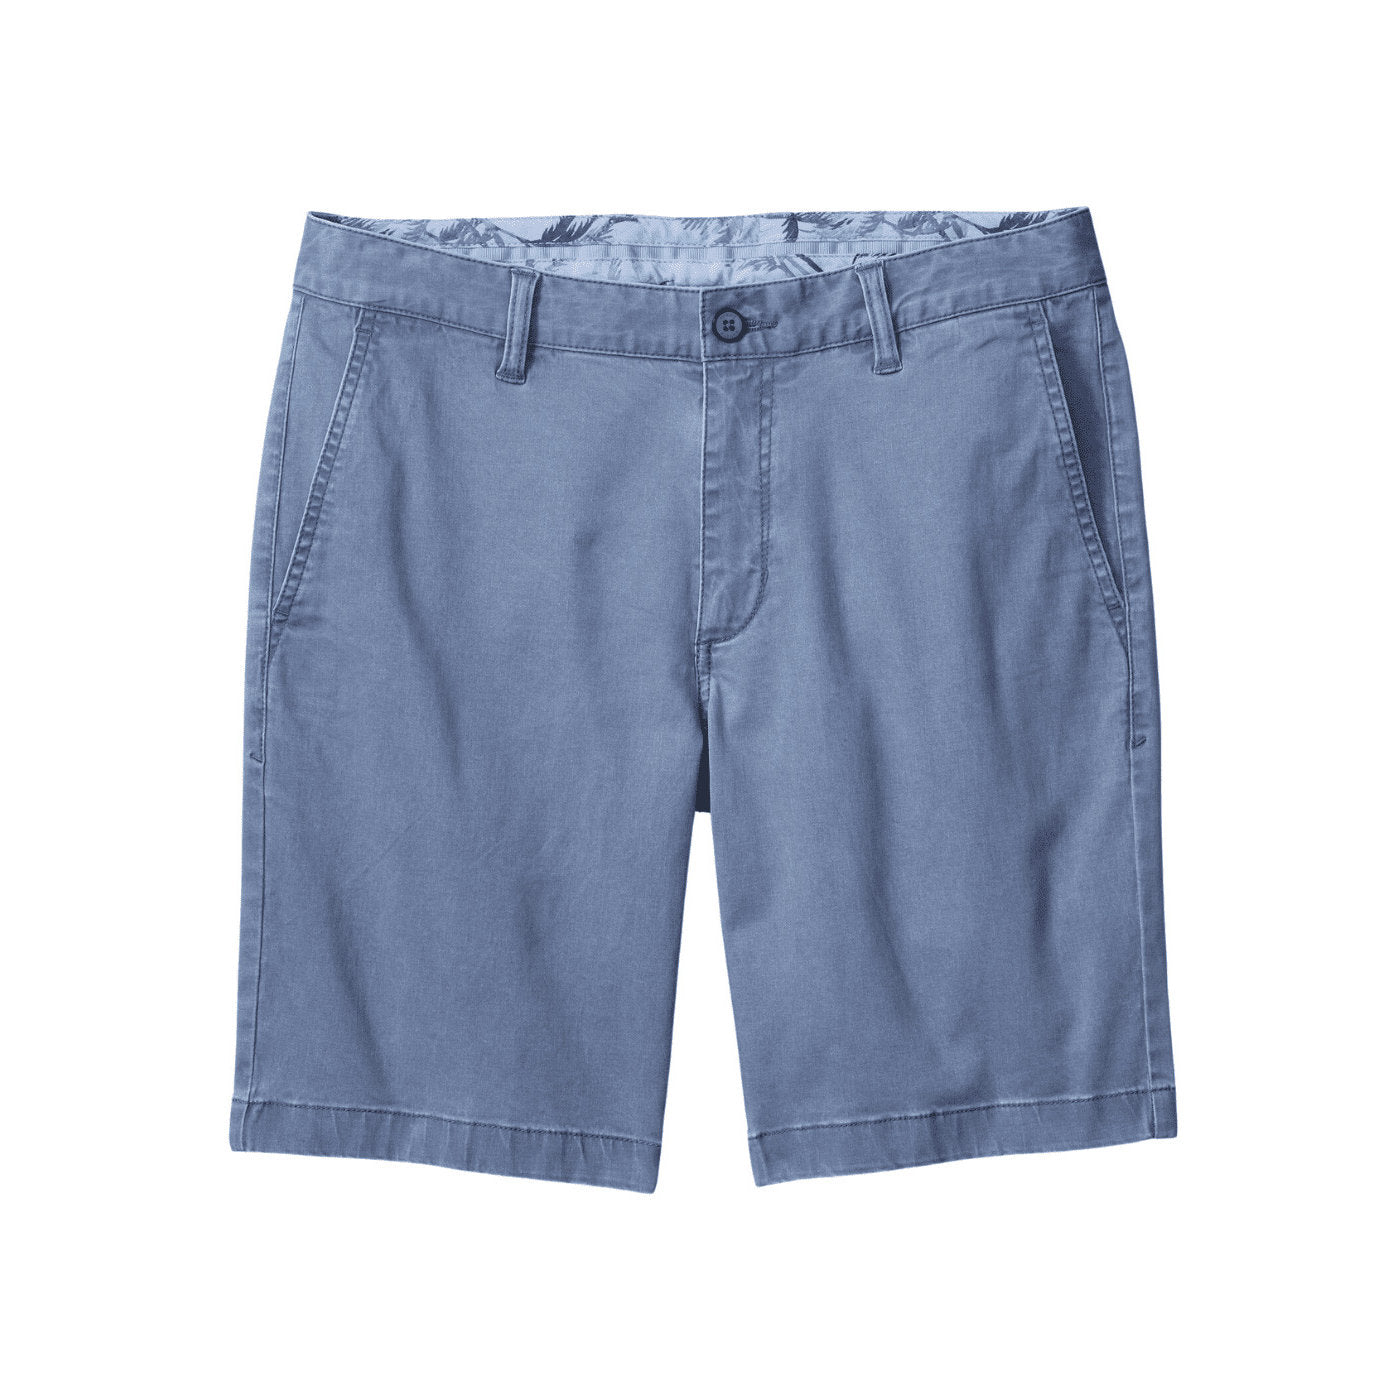 'Tommy Bahama Boracay 10" Chino Shorts' in 'Port Side Blue' colour